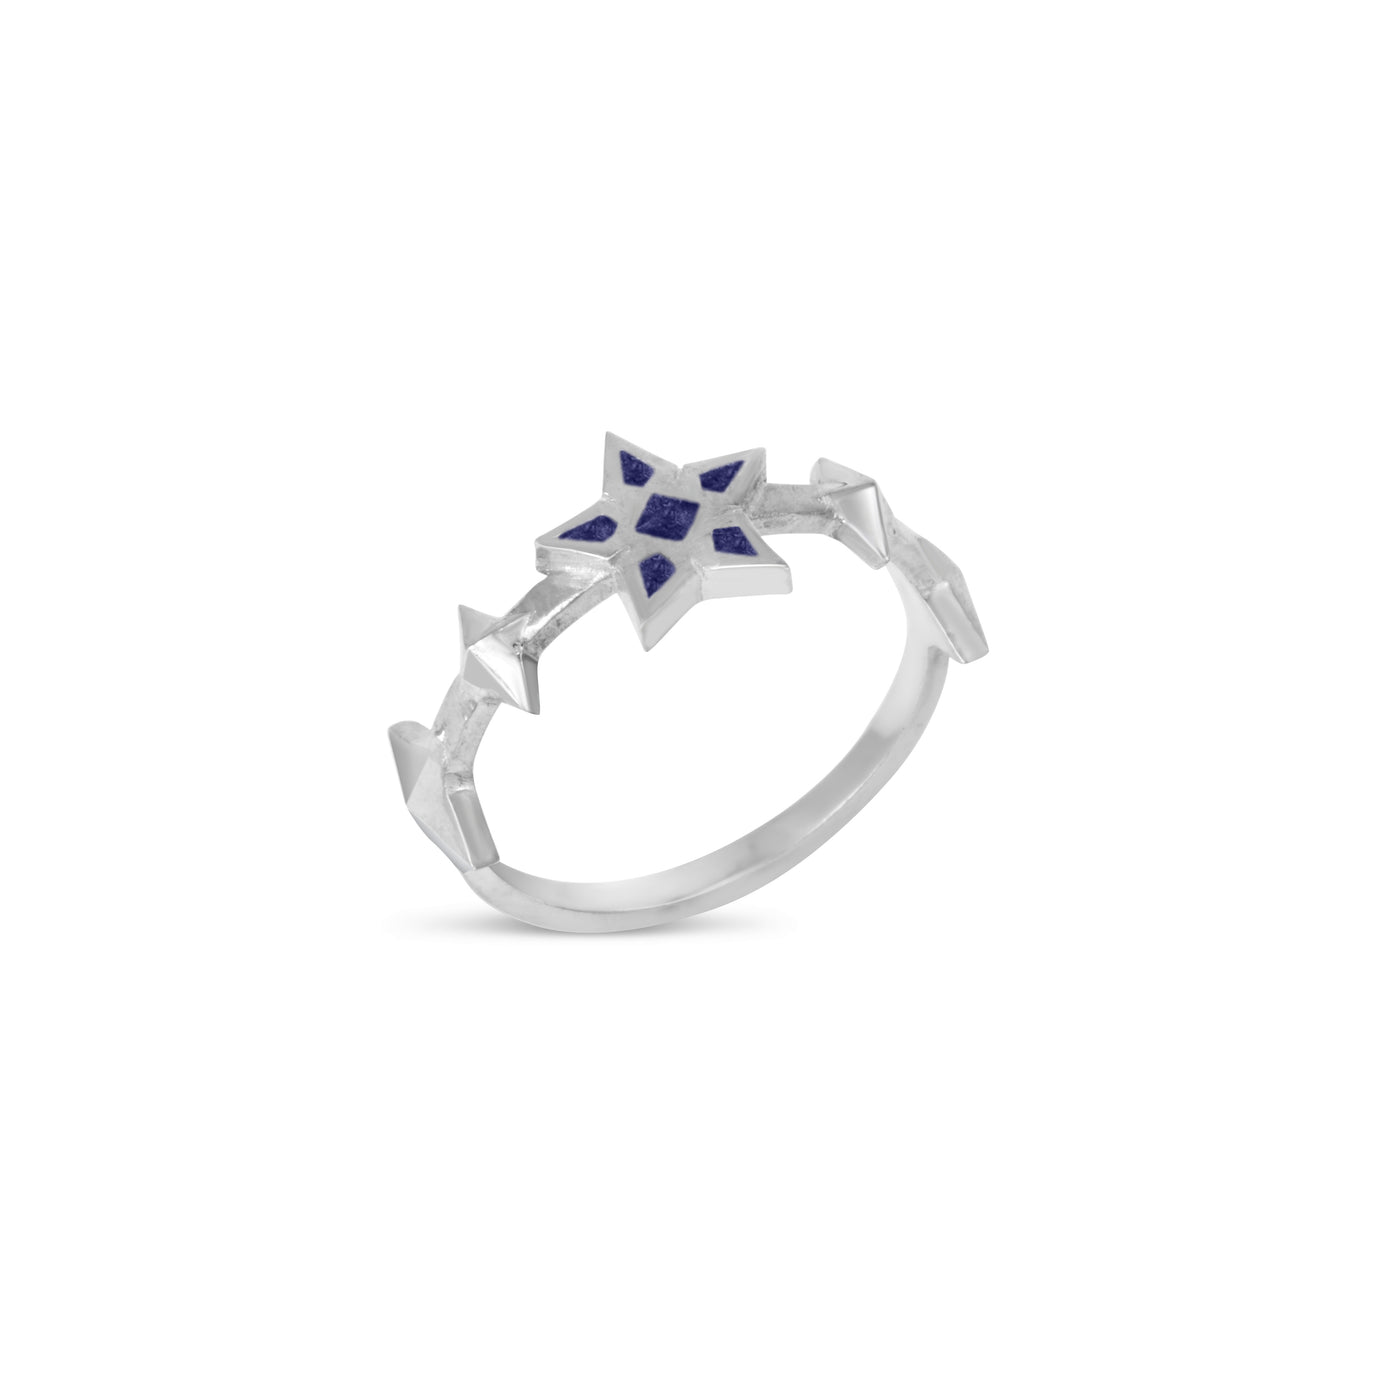 Layla Star Ring  with Blue Enamel